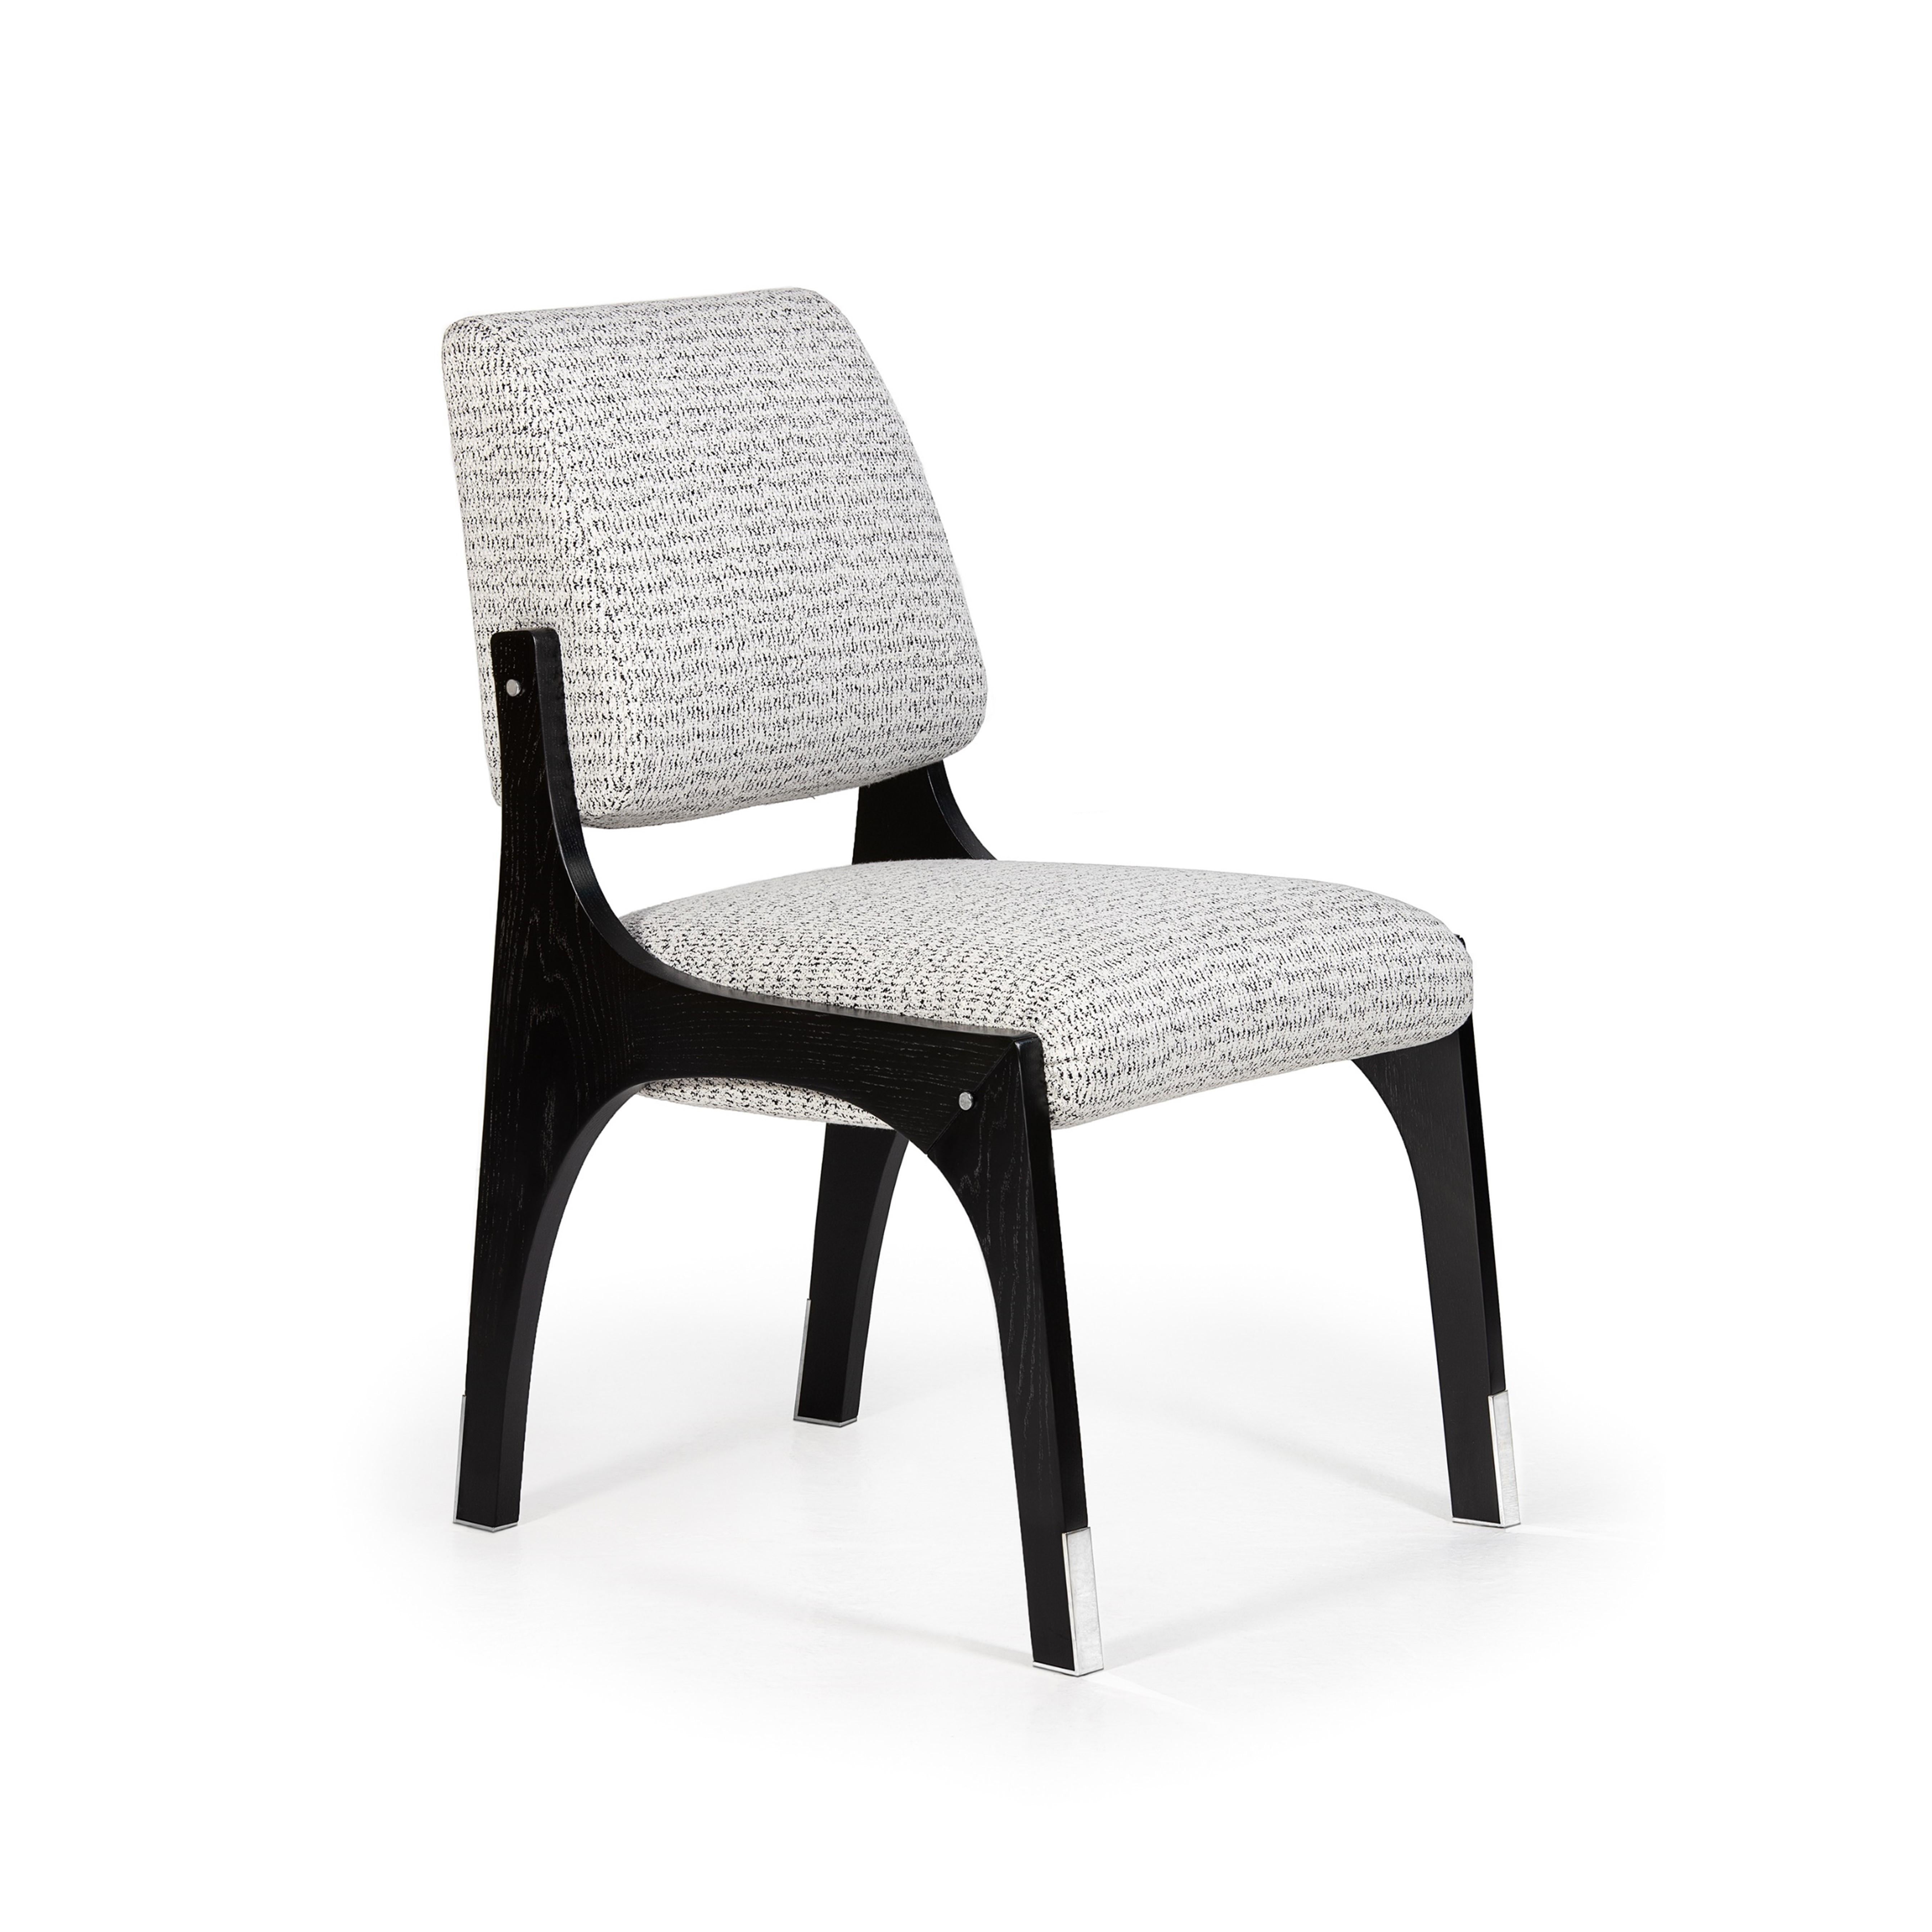 Modern Arches II Dining Chair, Steel & COM, InsidherLand by Joana Santos Barbosa For Sale